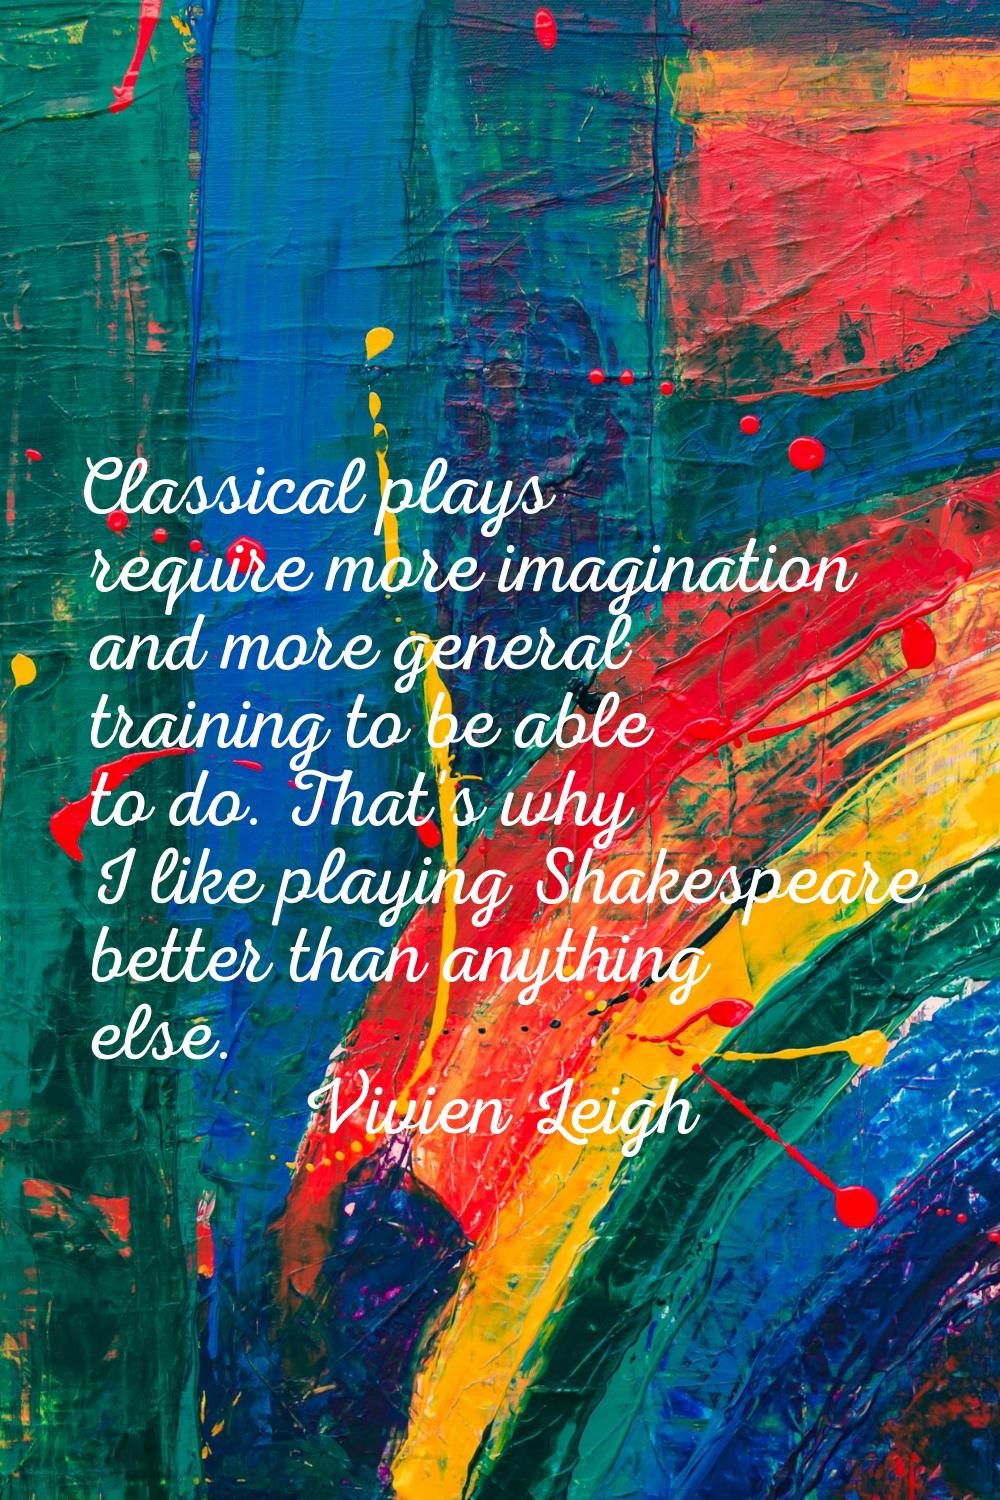 Classical plays require more imagination and more general training to be able to do. That's why I l